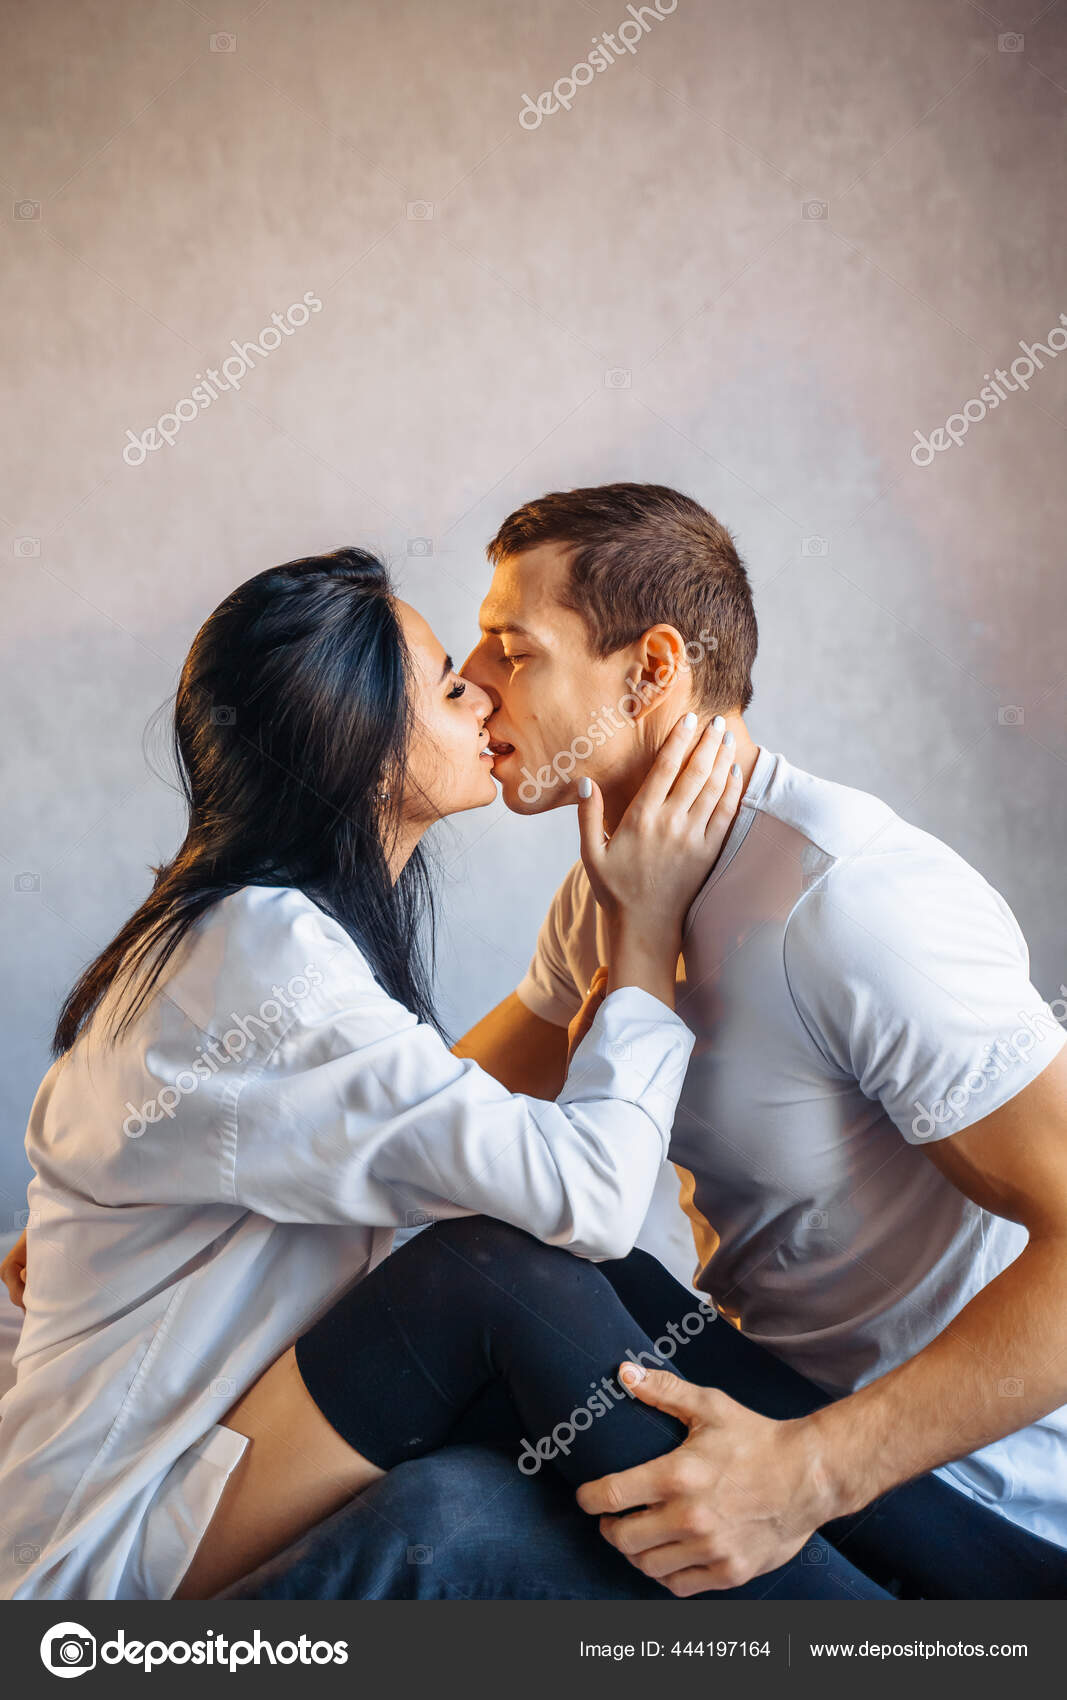 Attractive Young Couple Lovers Having Sex Home Bed Bright Room Stock Photo by ©dariaagaf 444197164